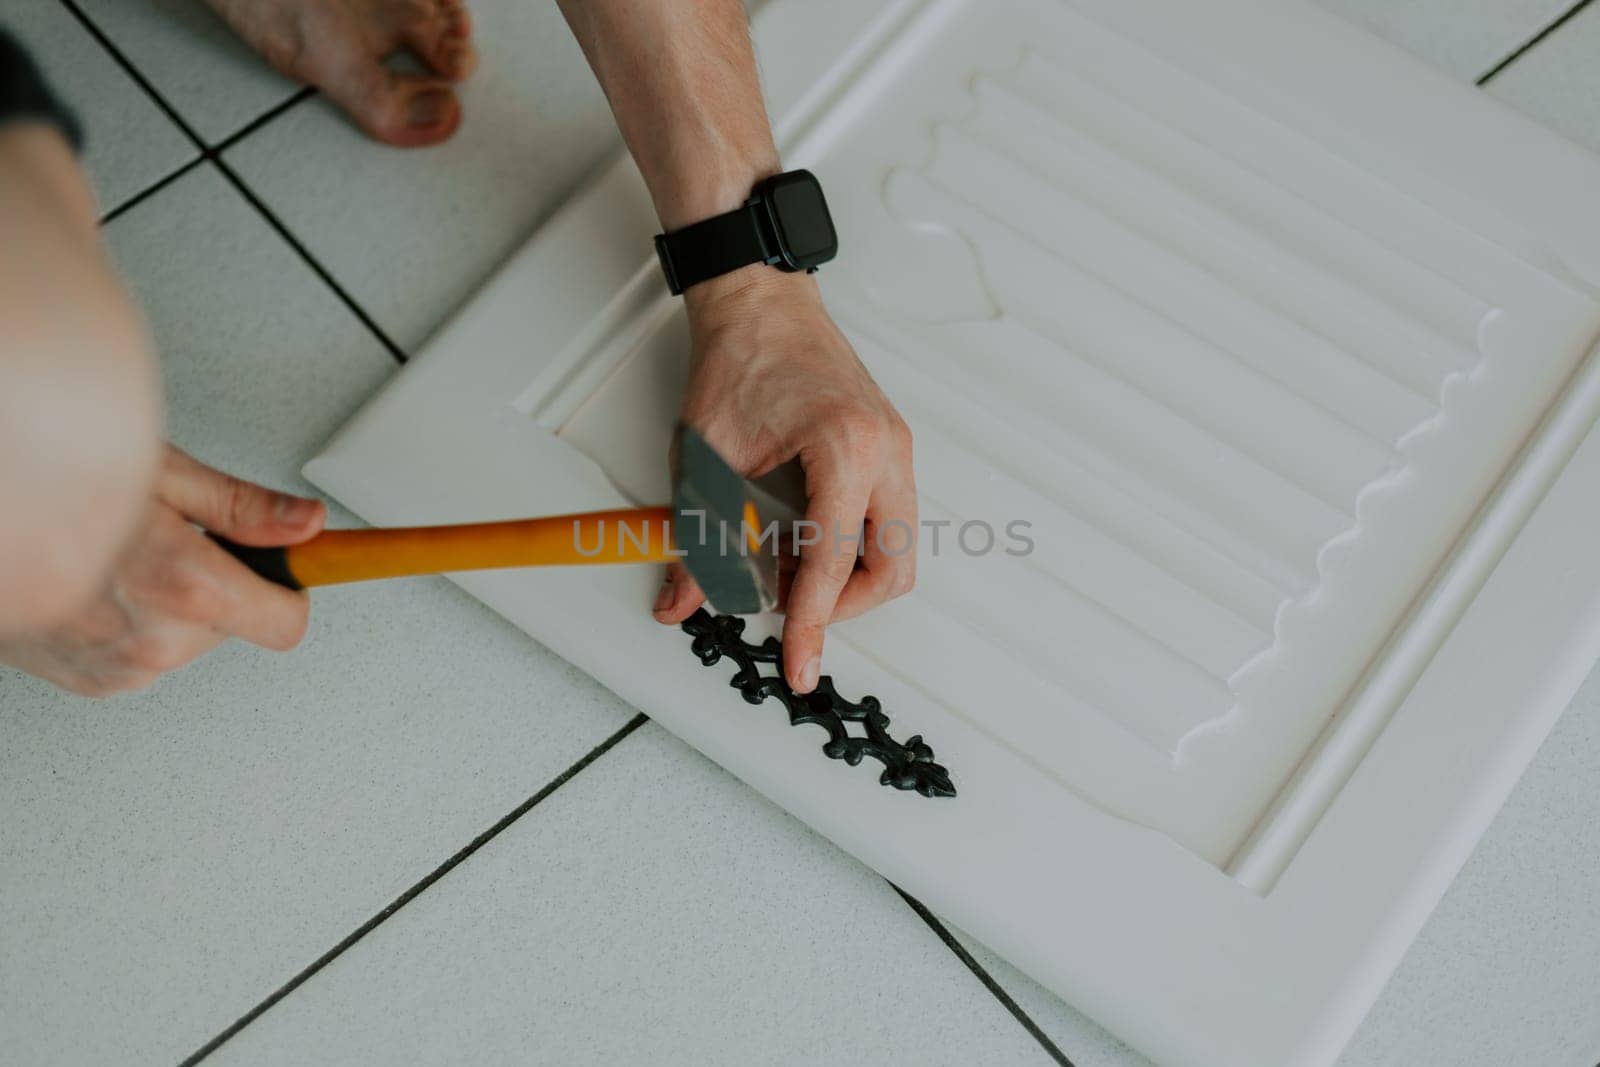 Hands of a young Caucasian unrecognizable man hammers a nail, installing an antique carved black lock on a white cabinet door, squatting on a tiled floor, close-up top view.